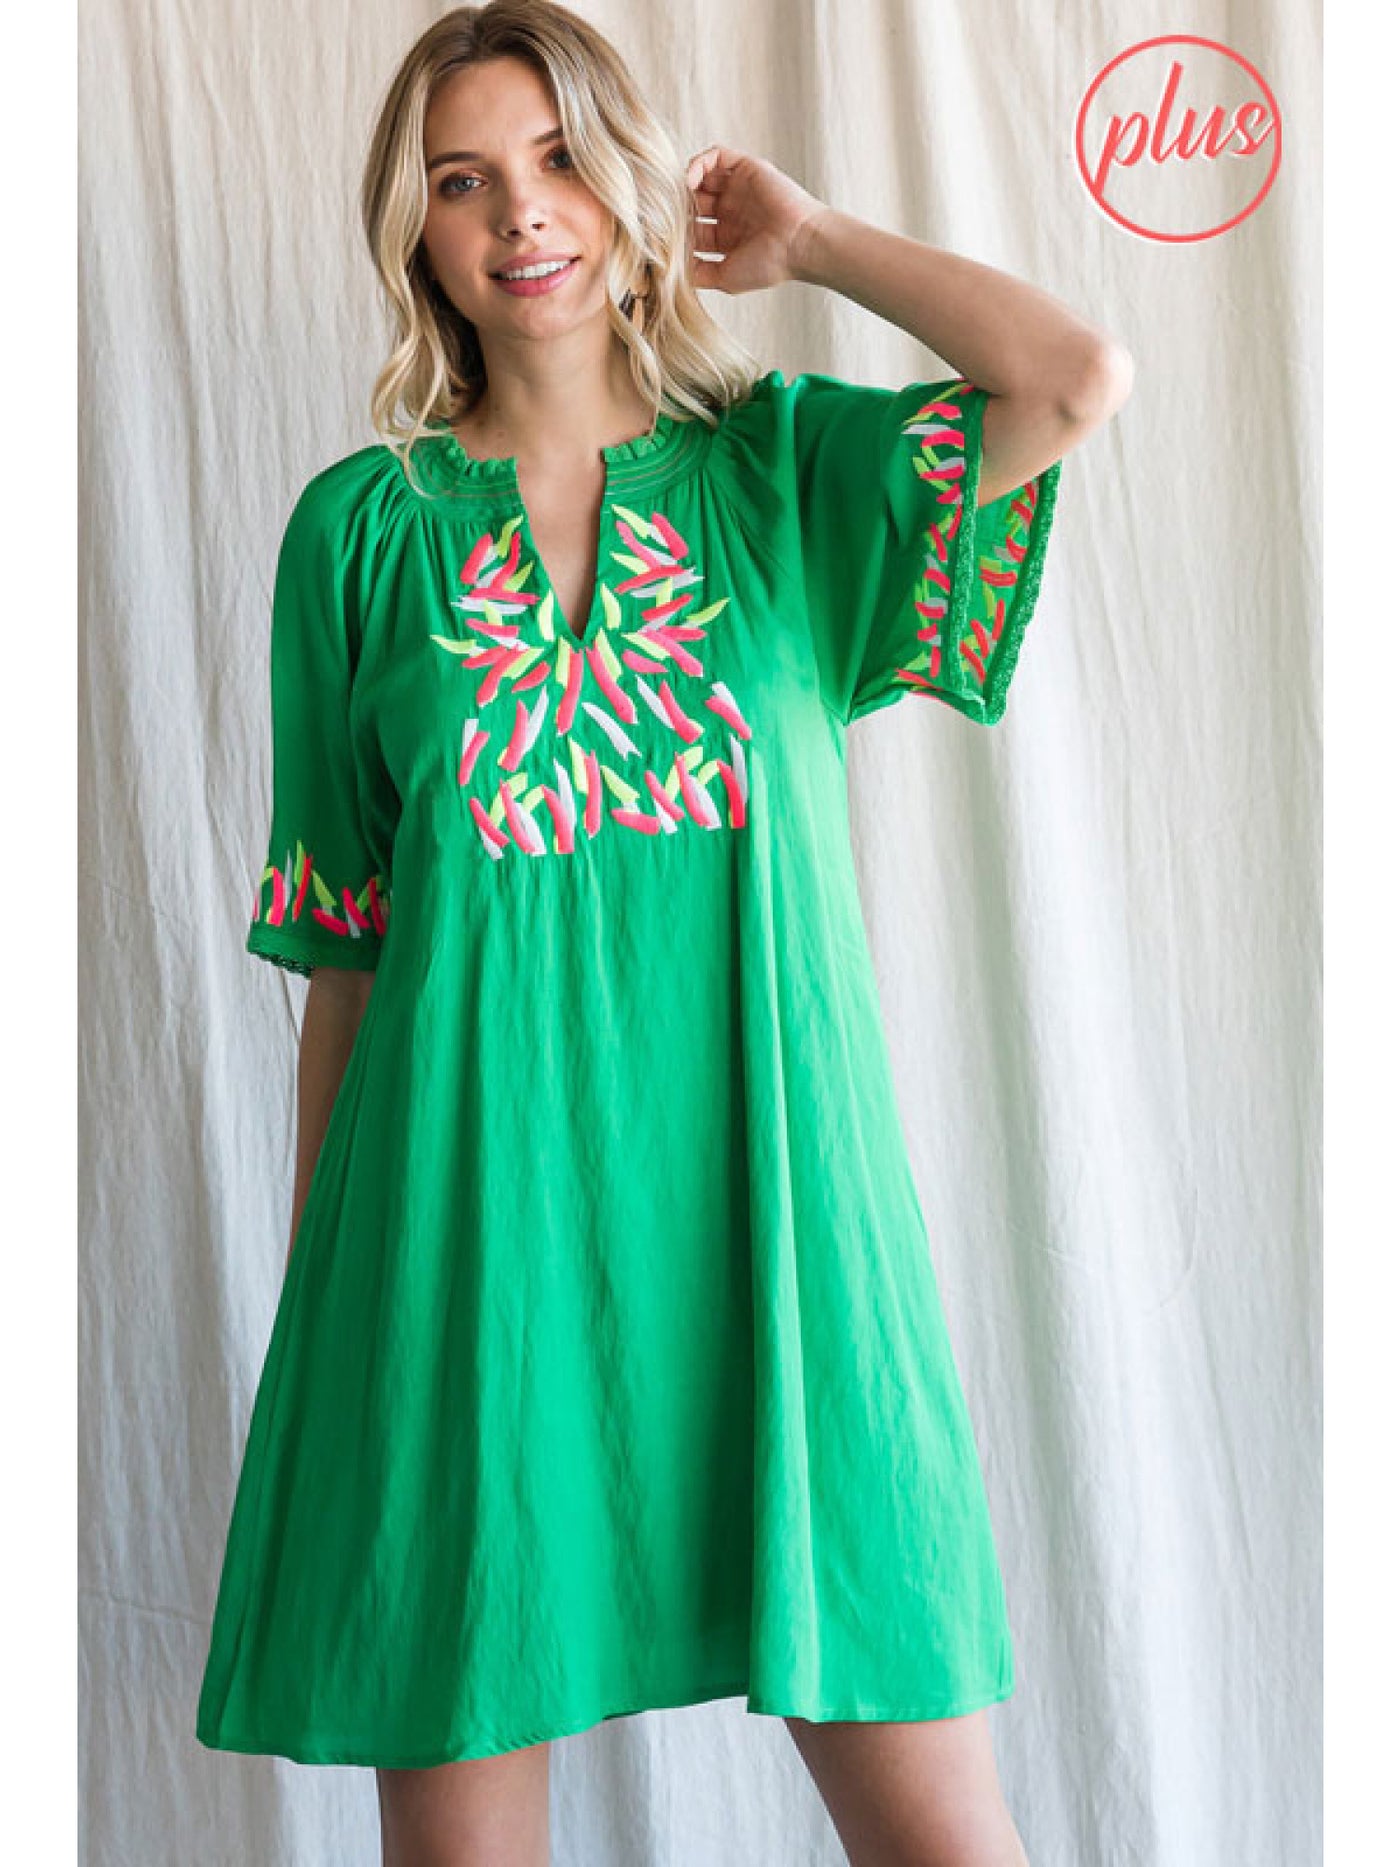 Curvy Kelly Green Solid Dress with a Slit Smocked Neck